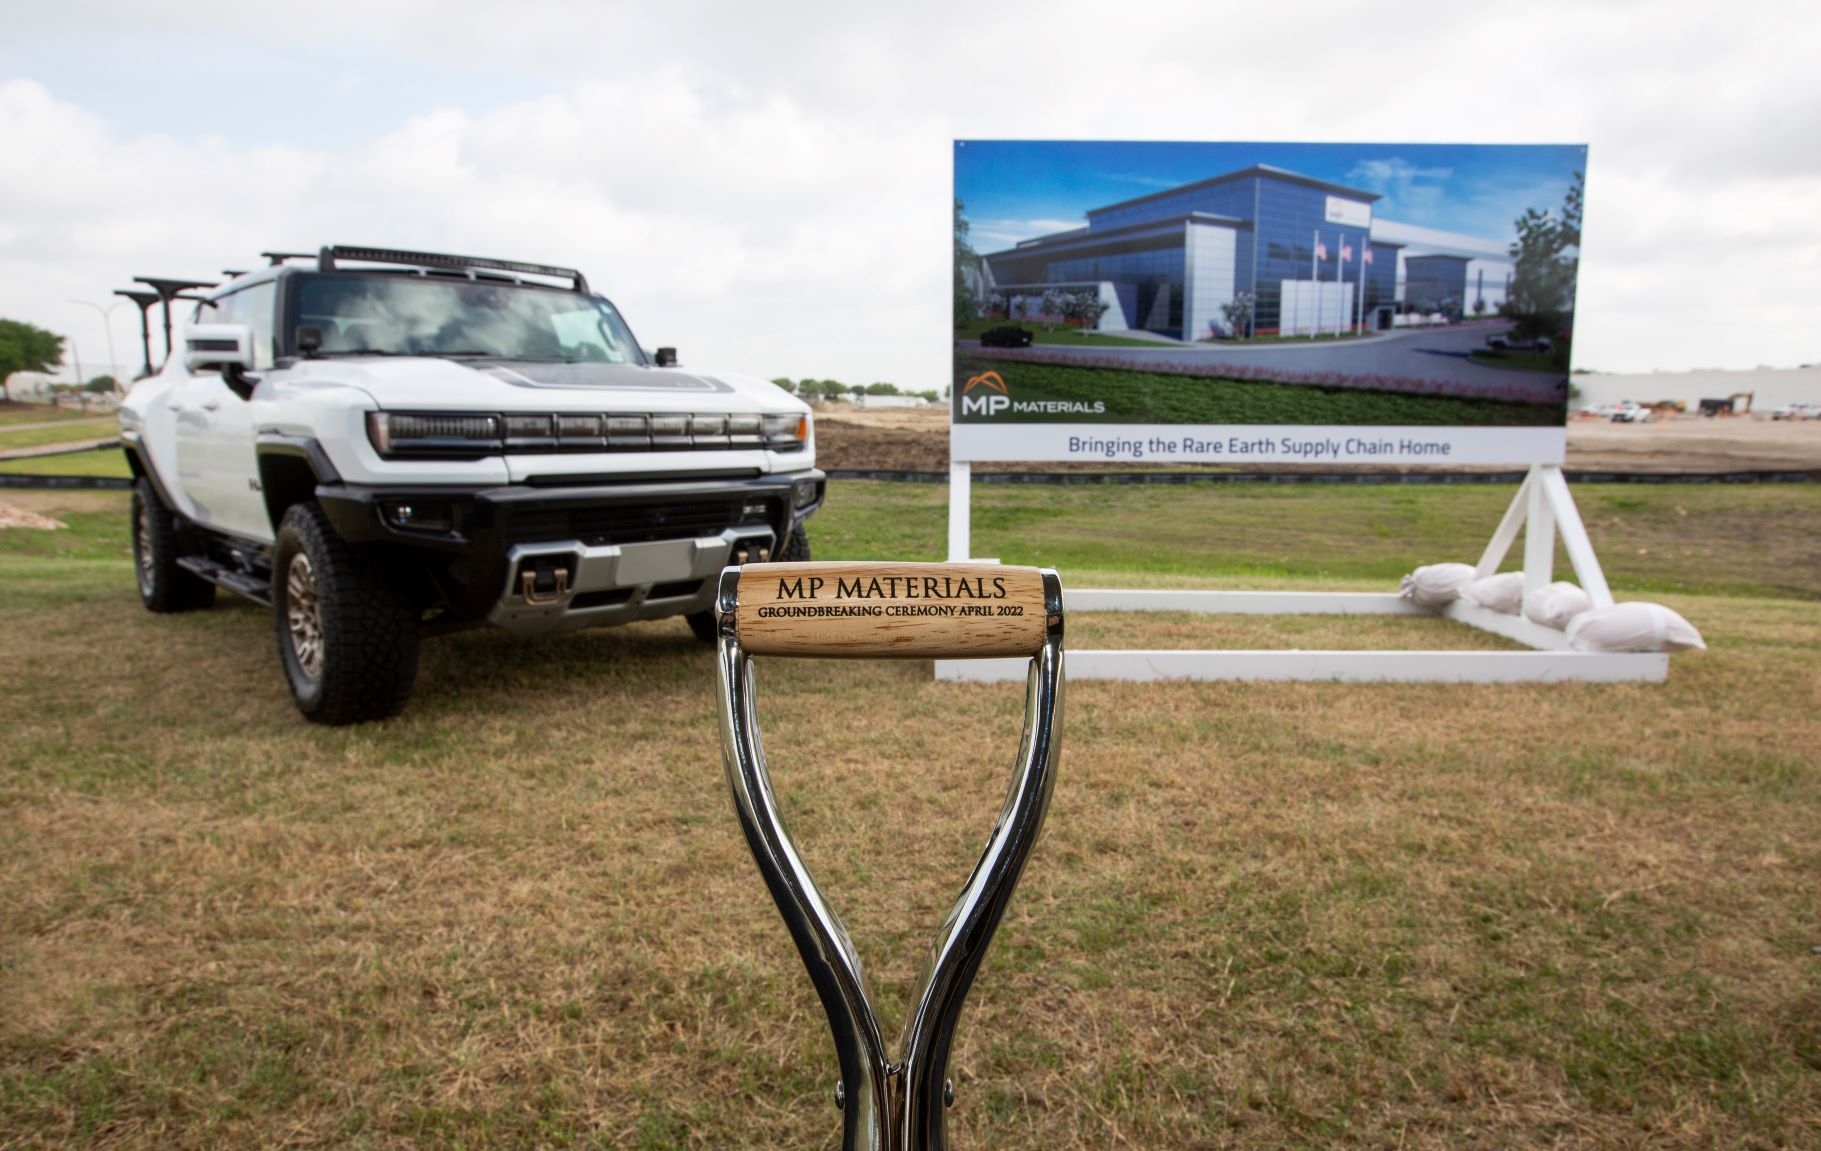 A truck and a large sign are seen at a groundbreaking event for MP Materials at AllianceTexas.